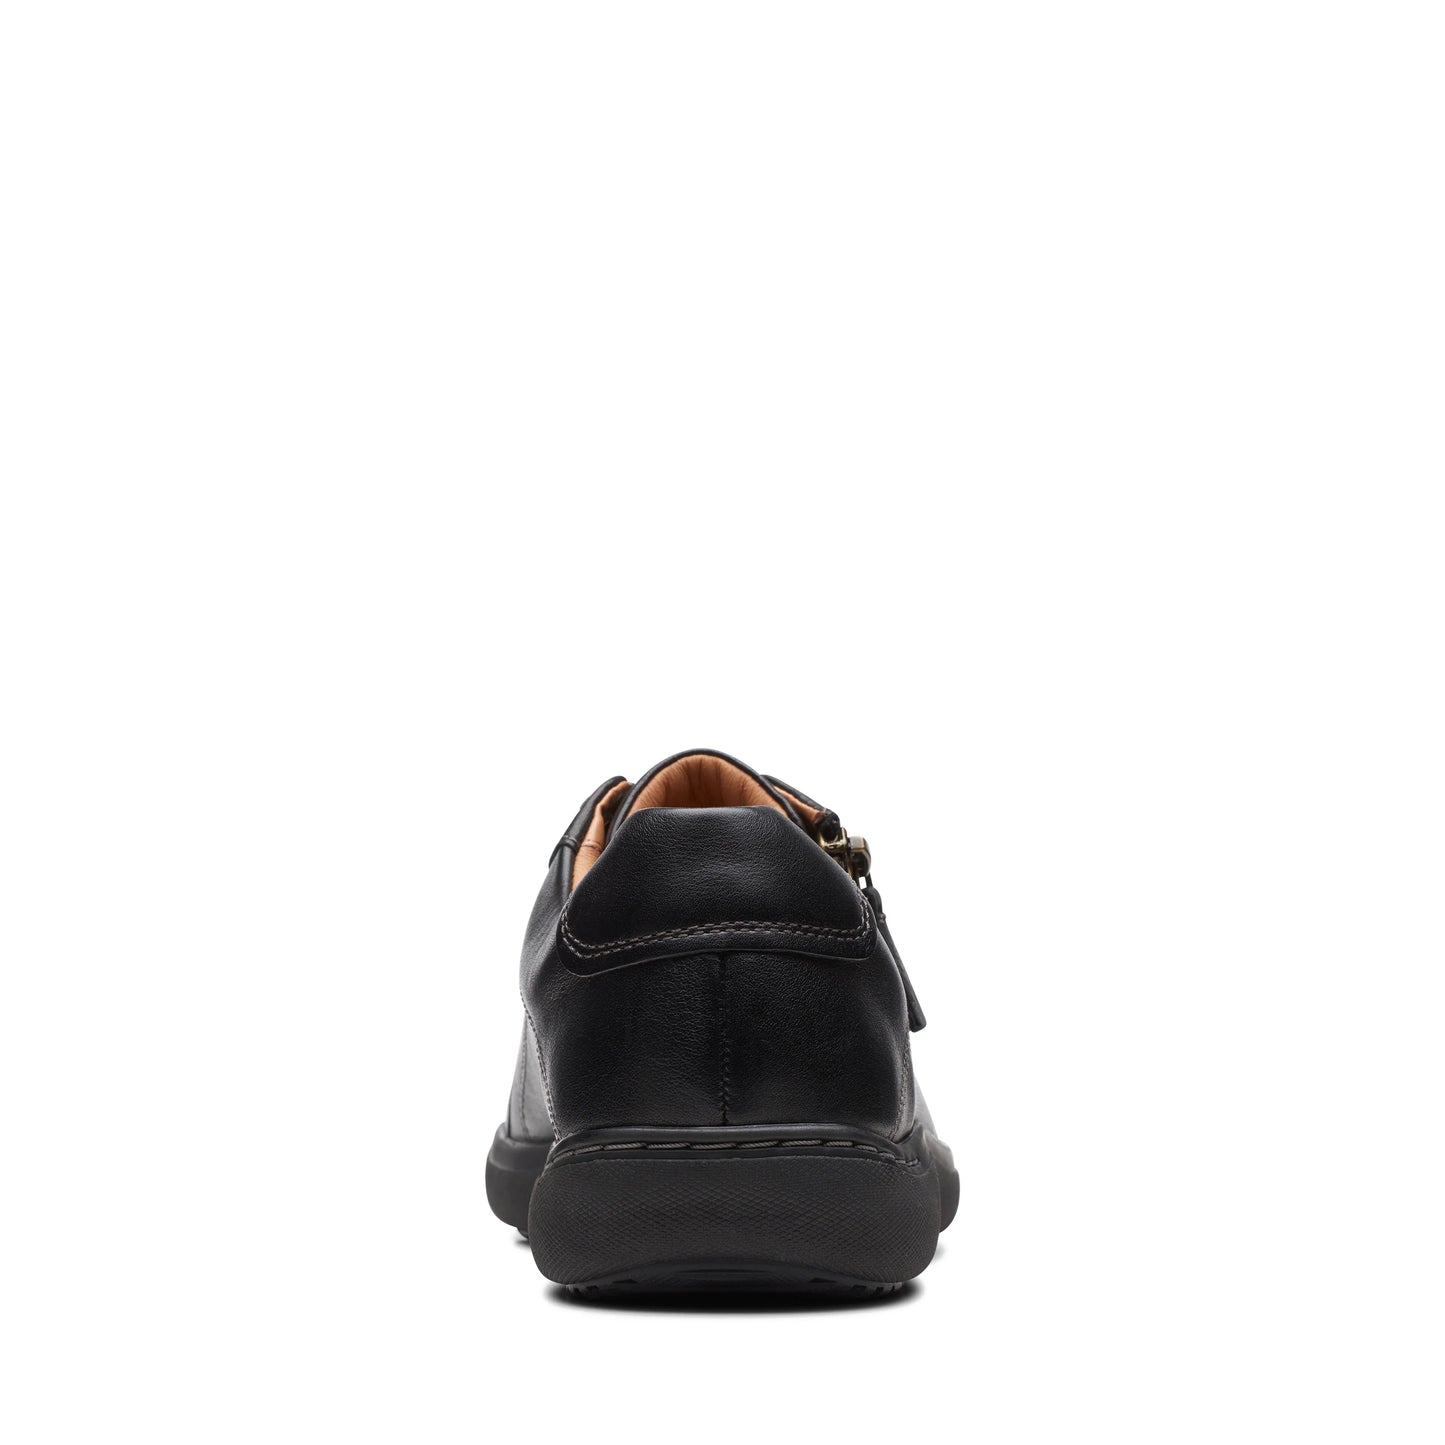 CLARKS | ZAPATOS DERBY MUJER | NALLE LACE BLACK/BLACK | NEGRO